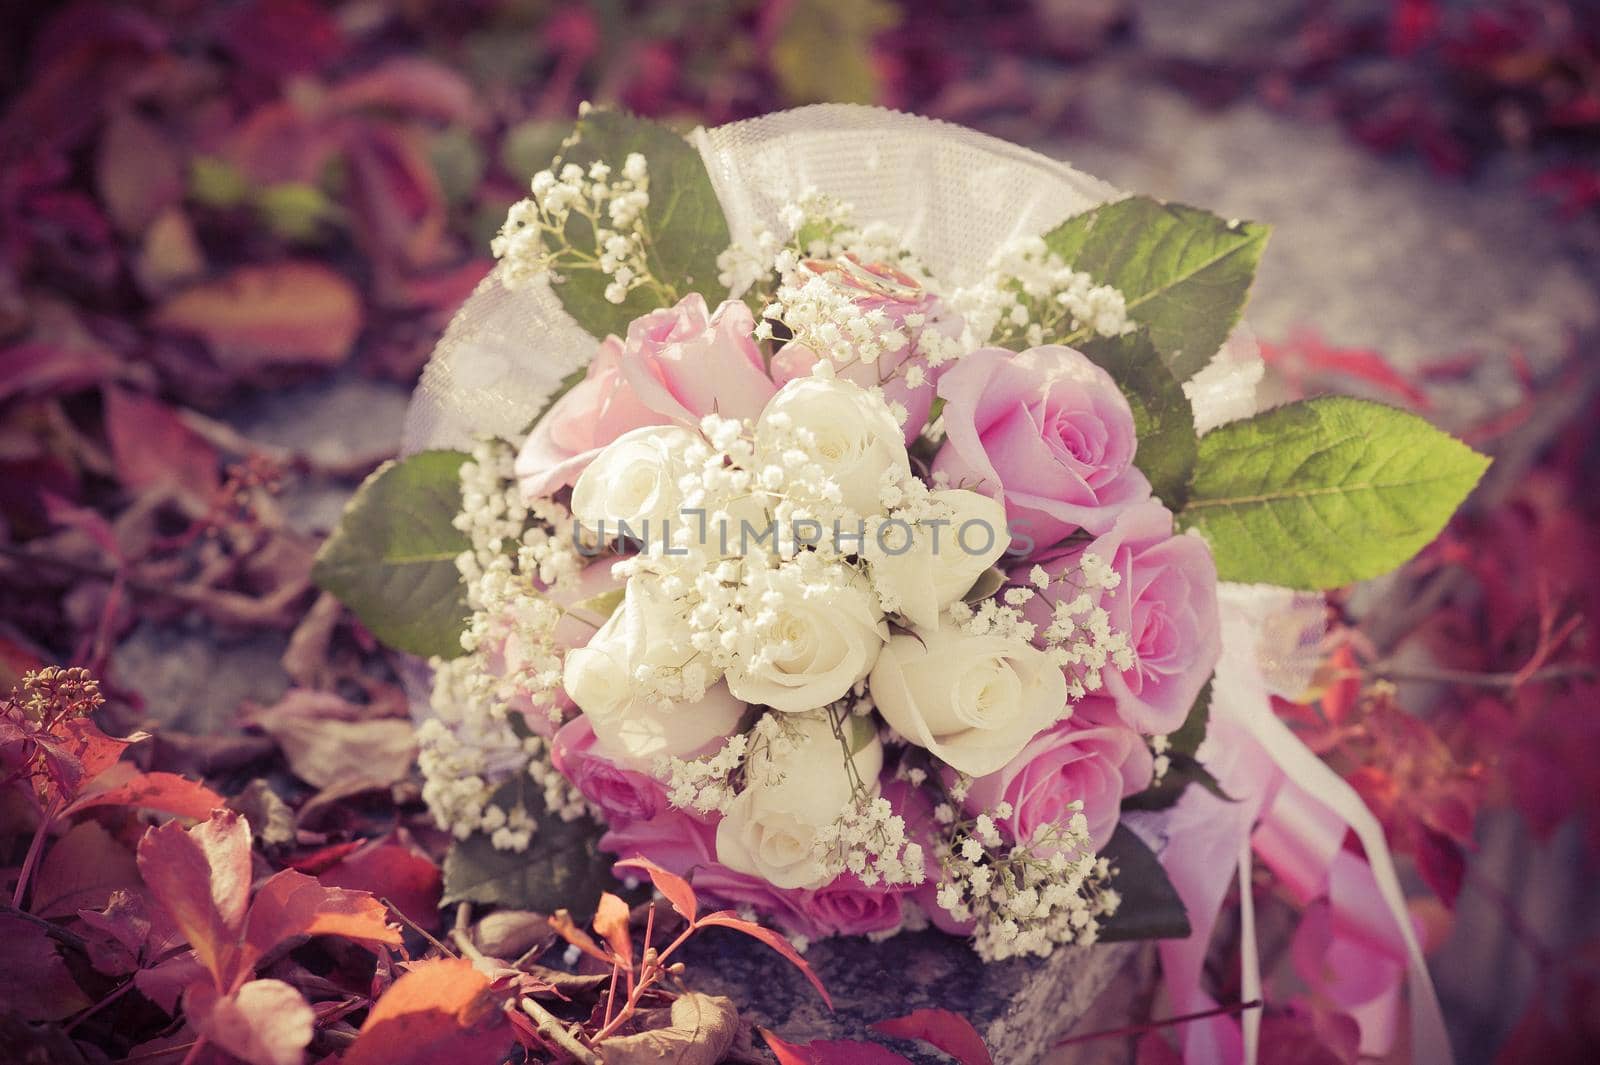 Bridal wedding bouquet of flowers. Wedding bouquet of pink and white roses lying on a grass.